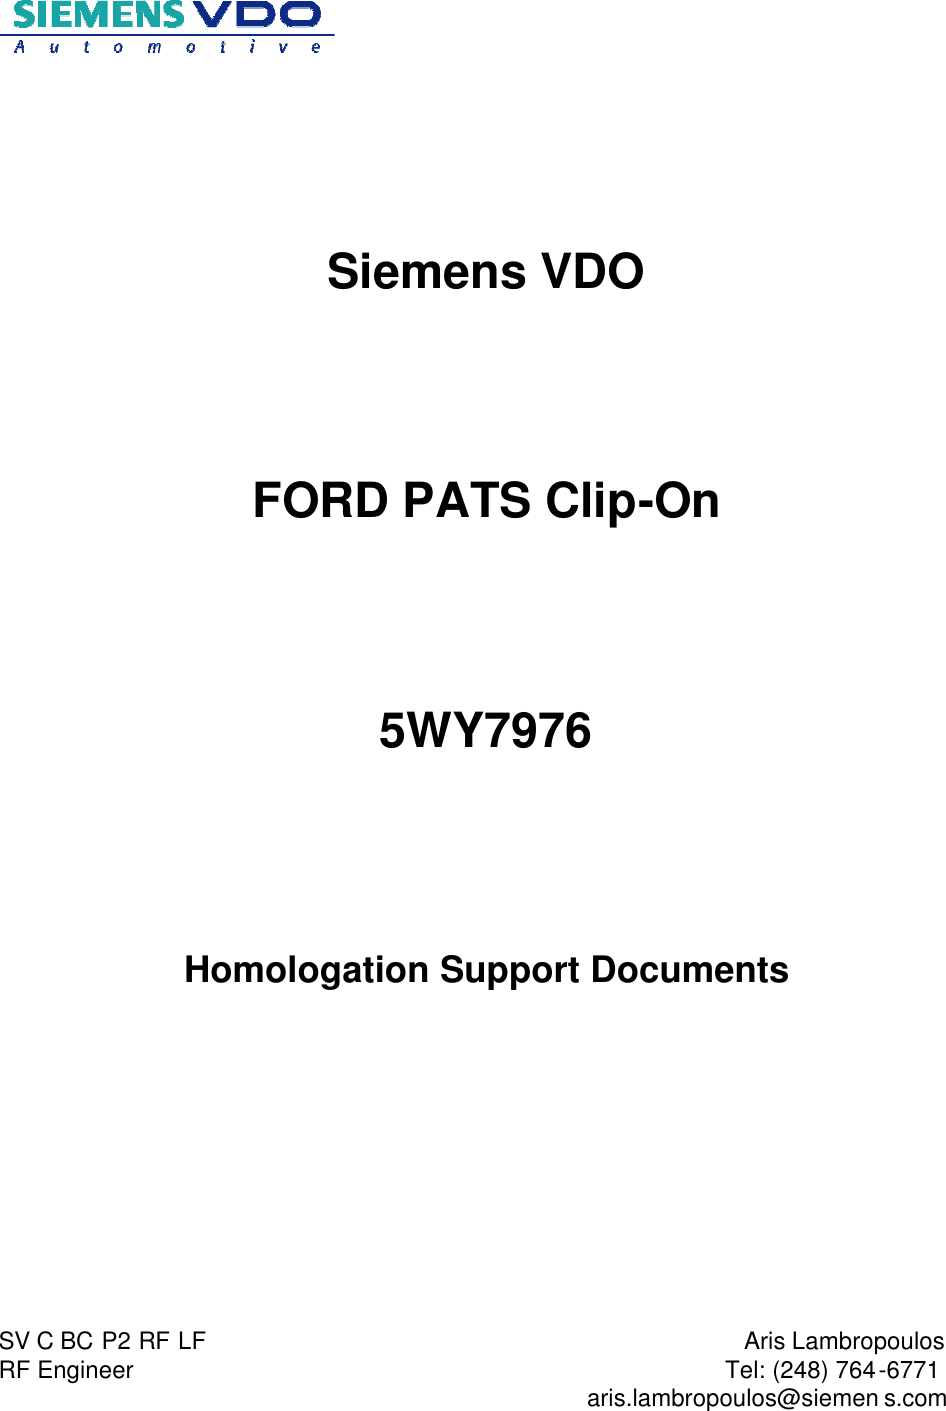                           SV C BC P2 RF LF  RF Engineer  Aris Lambropoulos Tel: (248) 764-6771   aris.lambropoulos@siemen s.com          Siemens VDO    FORD PATS Clip-On    5WY7976     Homologation Support Documents        